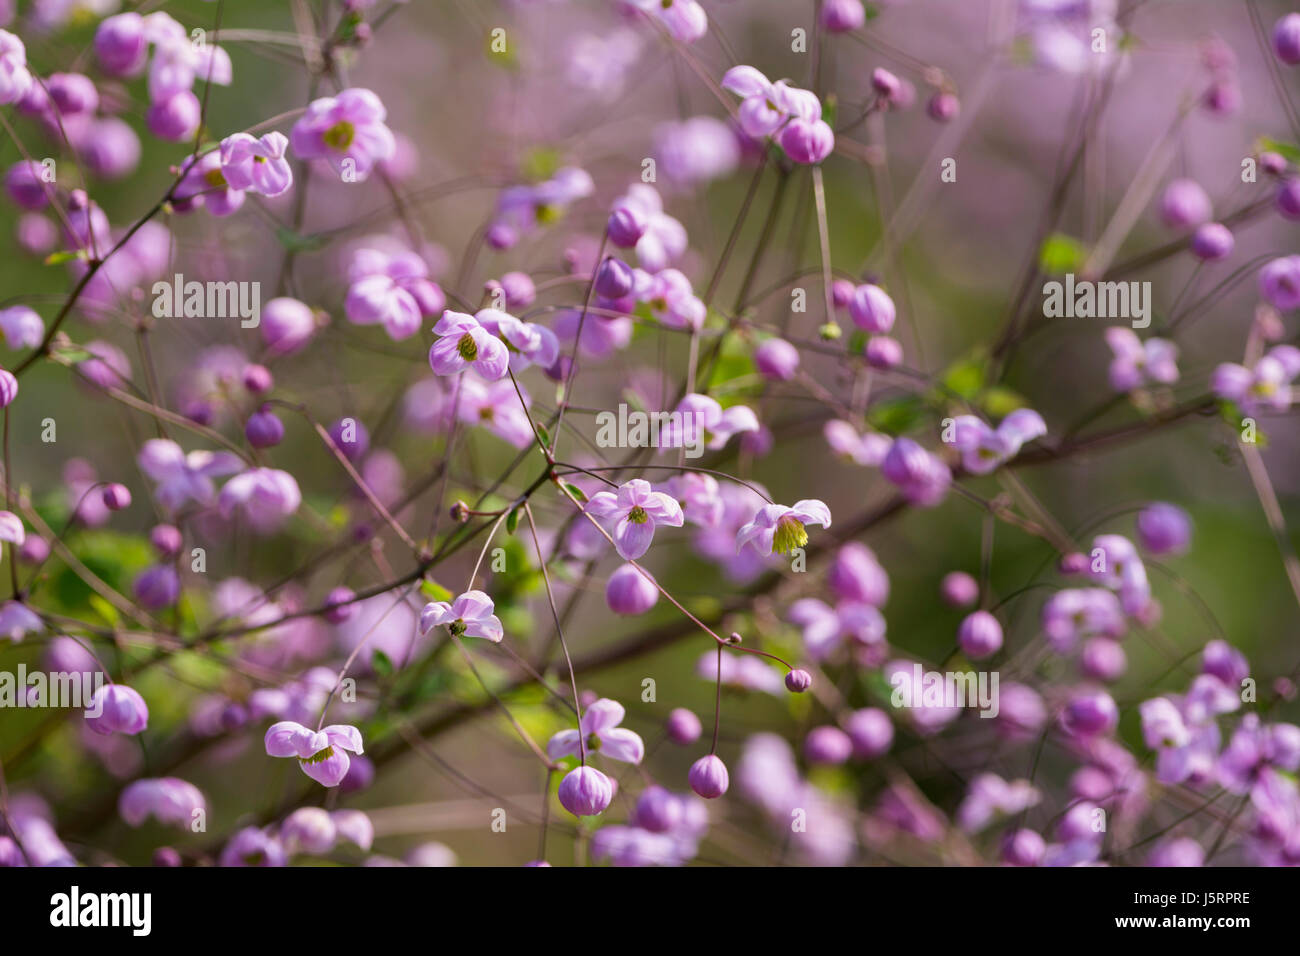 Meadow rue, Chinese meadow rue, Thalictrum delavayi, Tiny pink coloured flowers growing outdoor. Stock Photo